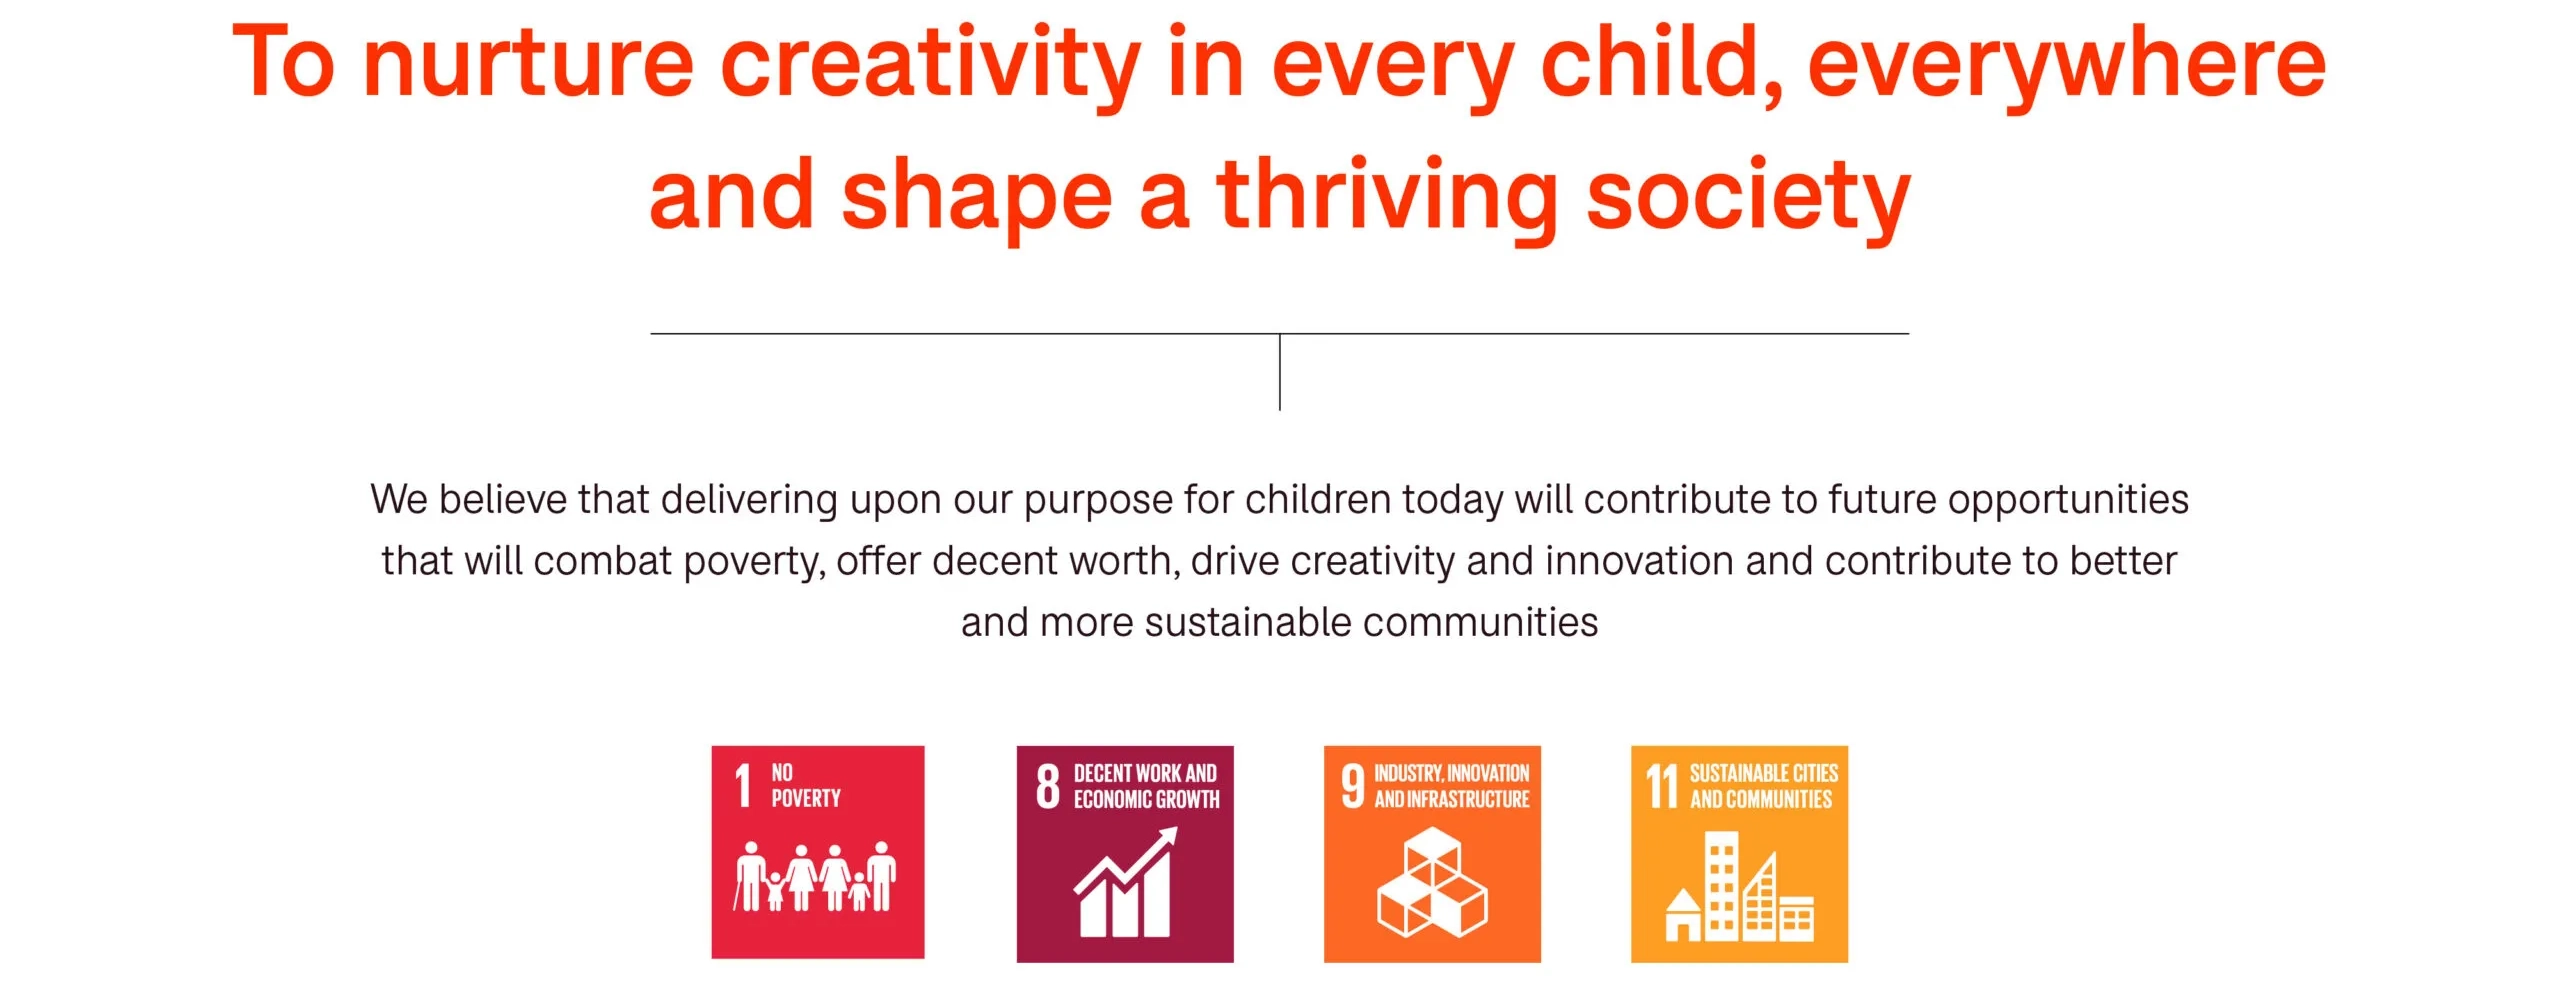 Mission statement about nurturing children's creativity and societal improvement, featuring icons for goals on poverty, economic growth, innovation, and sustainable cities.